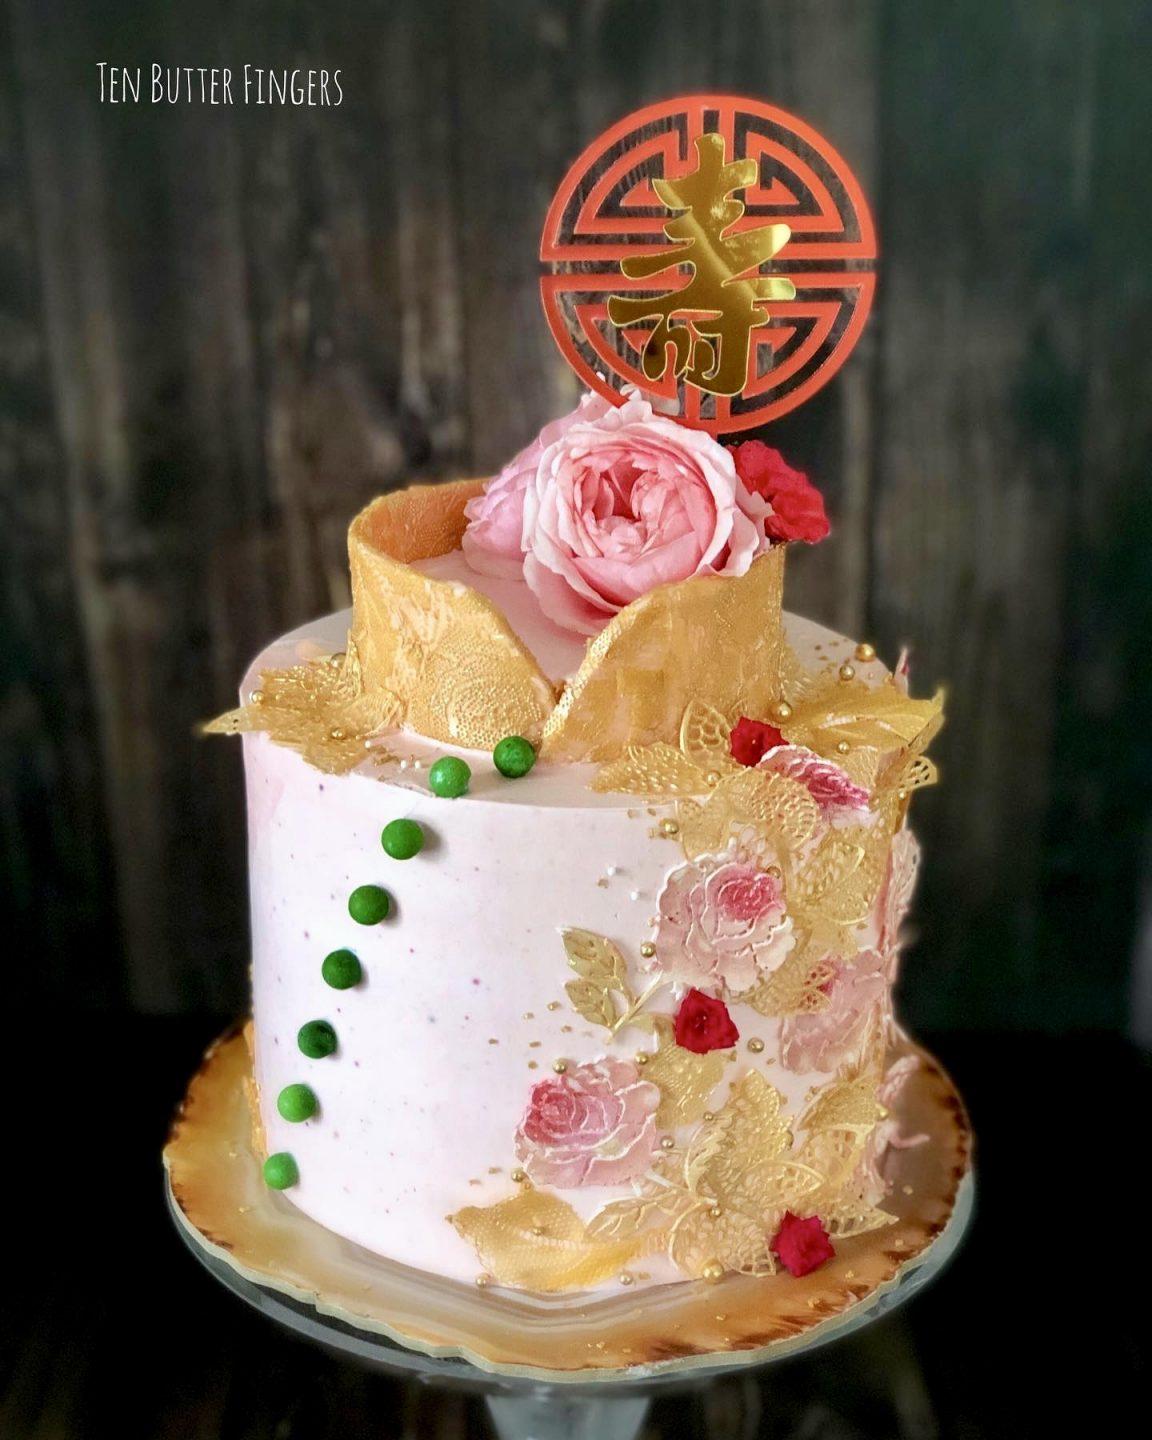 Jenny created this cake recently for her mother's 70th birthday, the design inspired by her mother's wedding cheongsum. The edible gold lace was done by Cheryl and Jenny took almost 12 hours to assemble the cake!